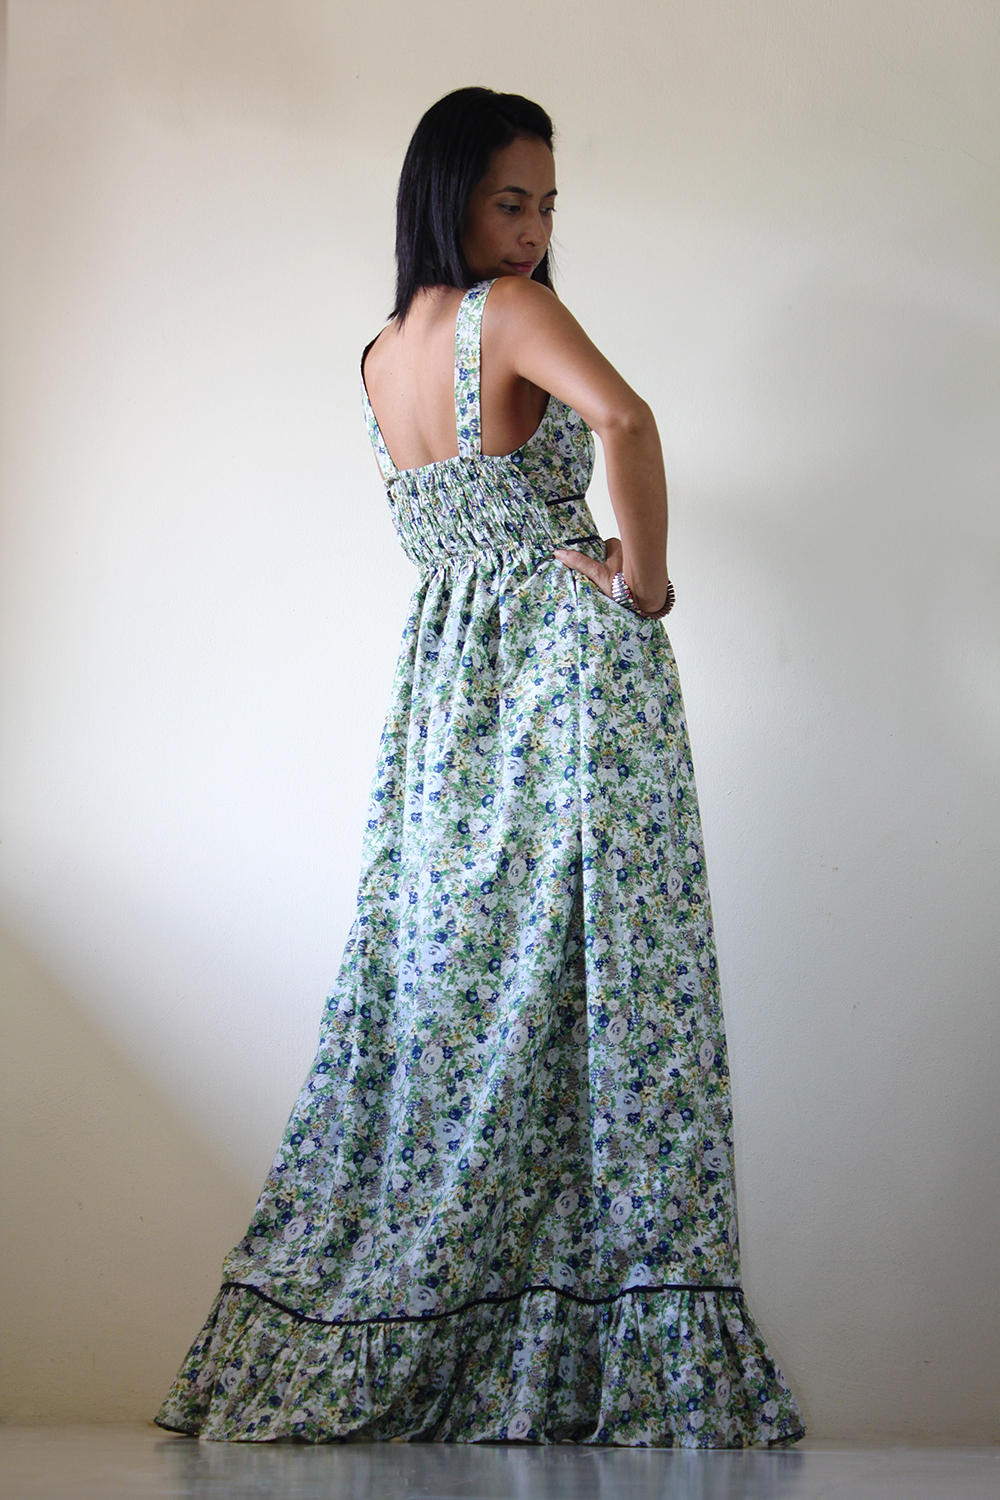 Floral Maxi Dress - Long Summer Dress : You Wear It Well Collection on ...